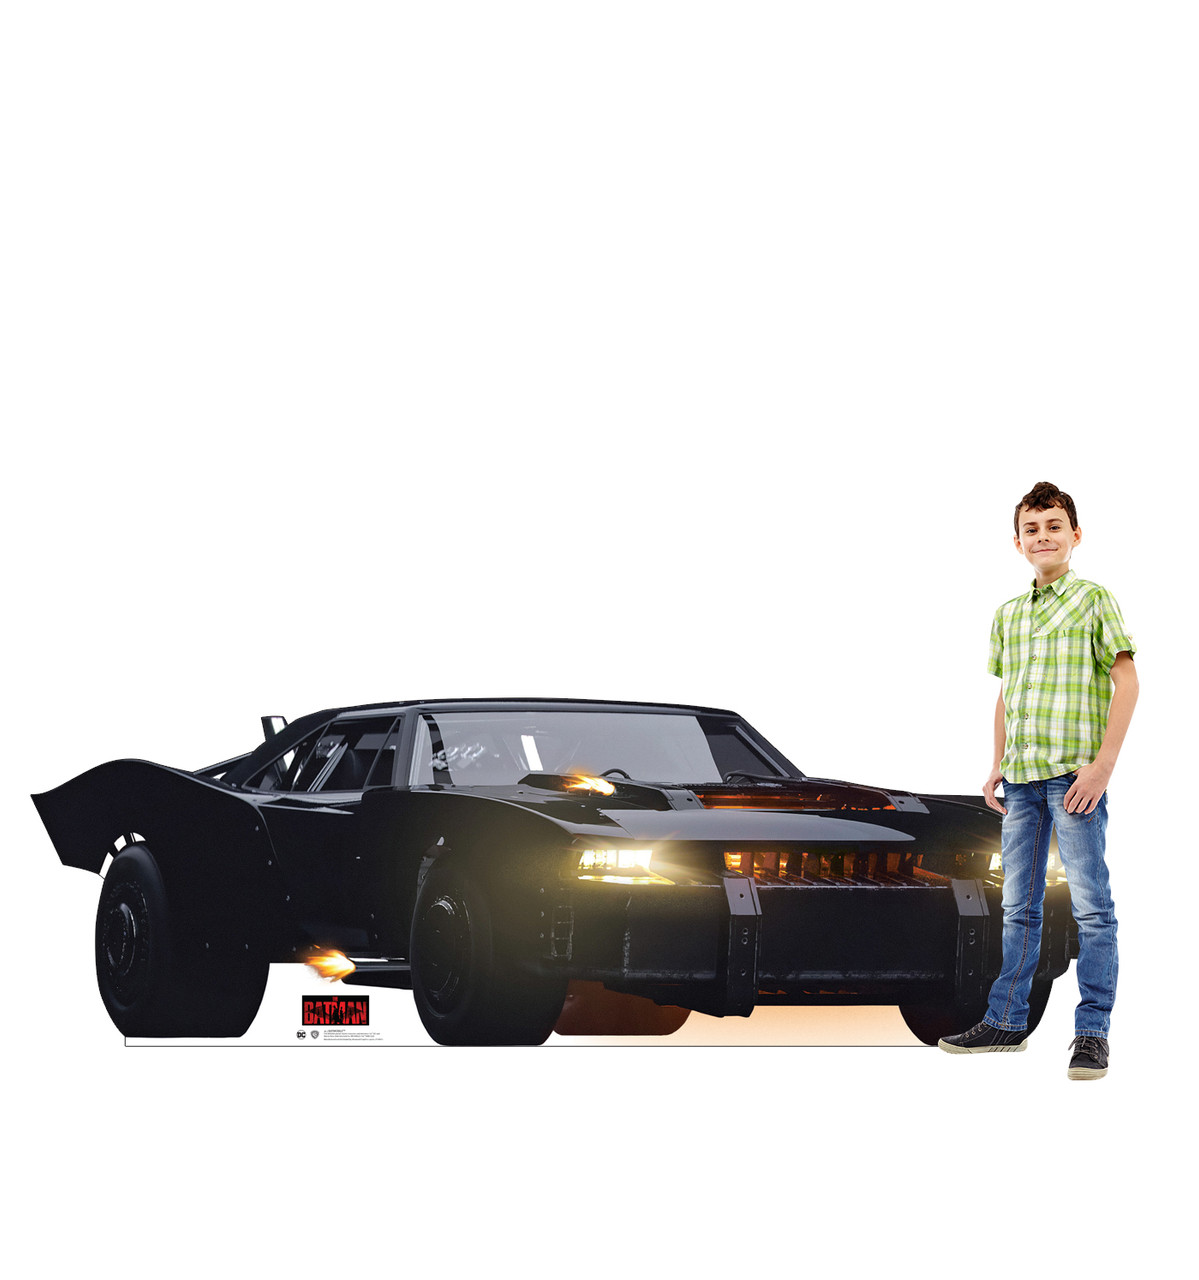 Life-size cardboard standee of the Batmobile with model.